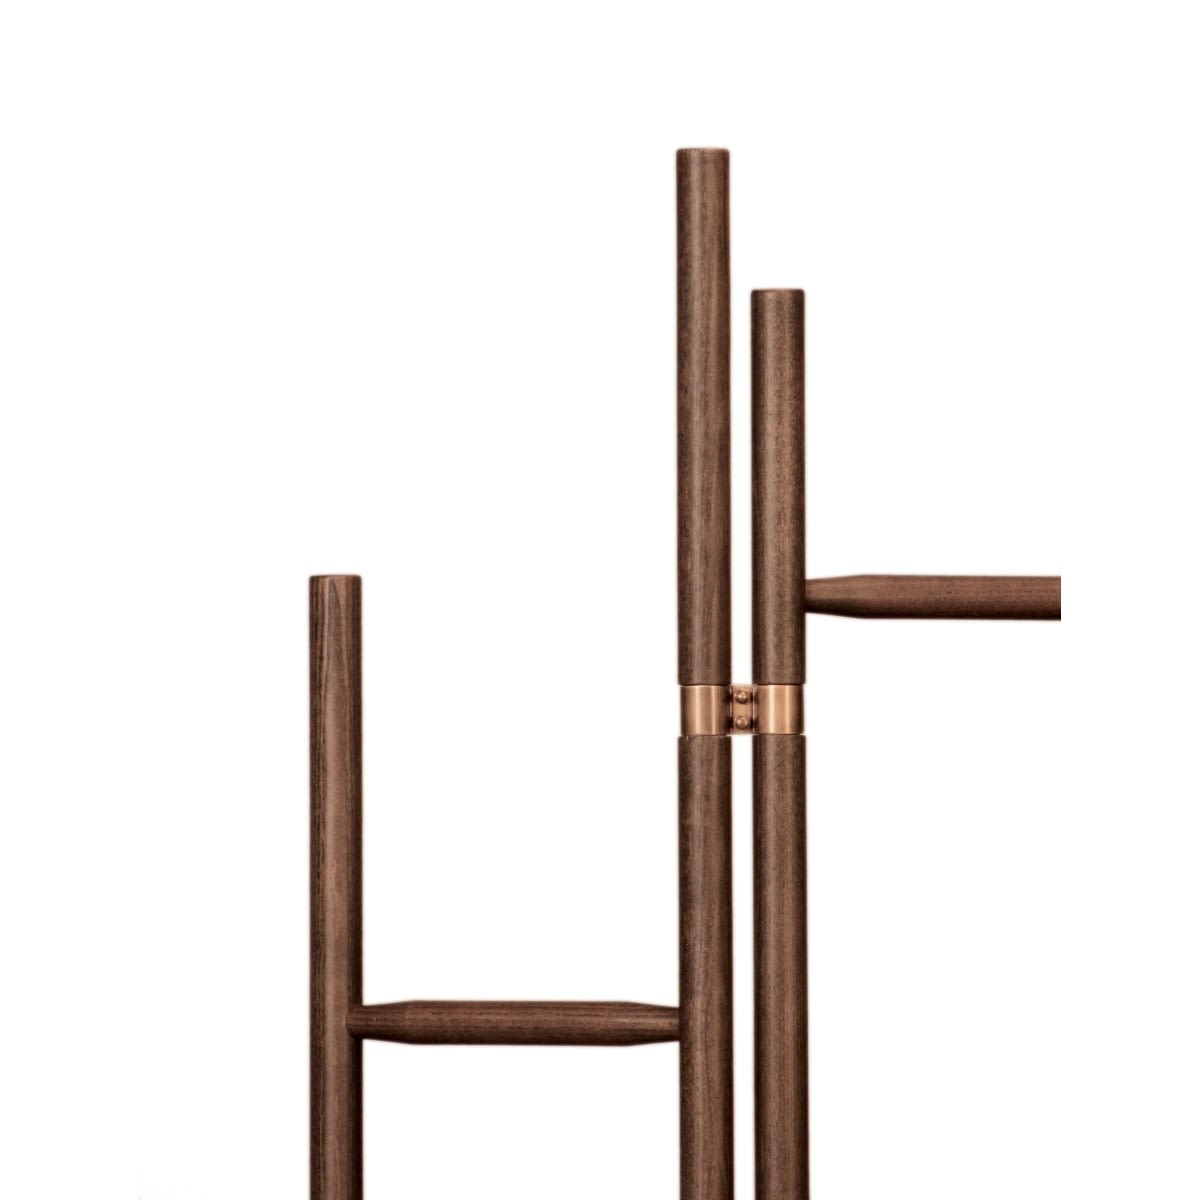 Taos Valet Stand